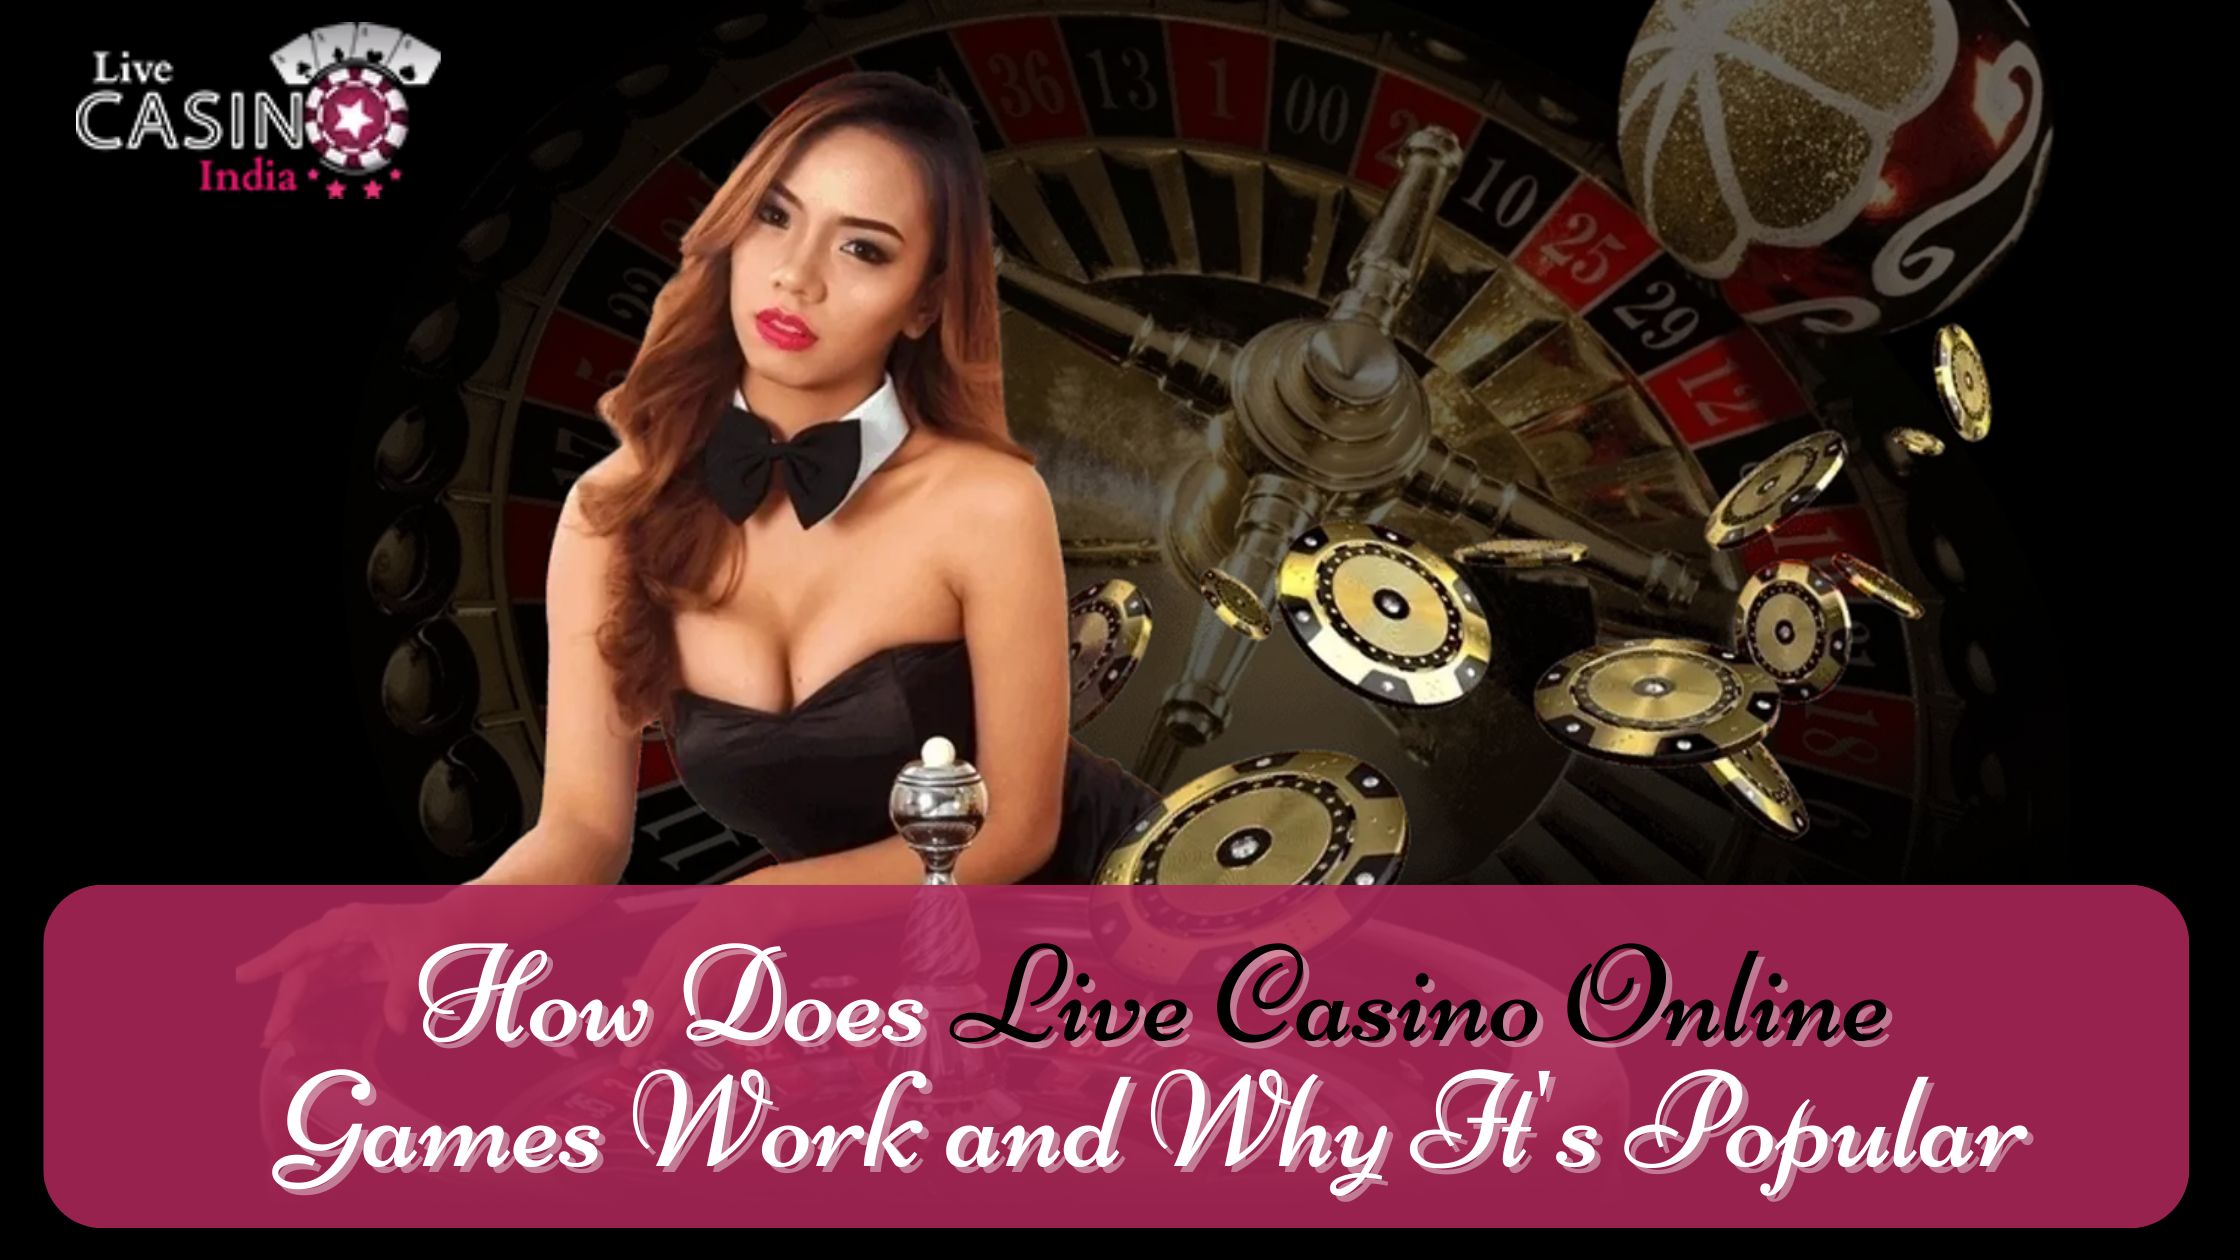 How Does Live Casino Online Games Work and Why Is It Popular?